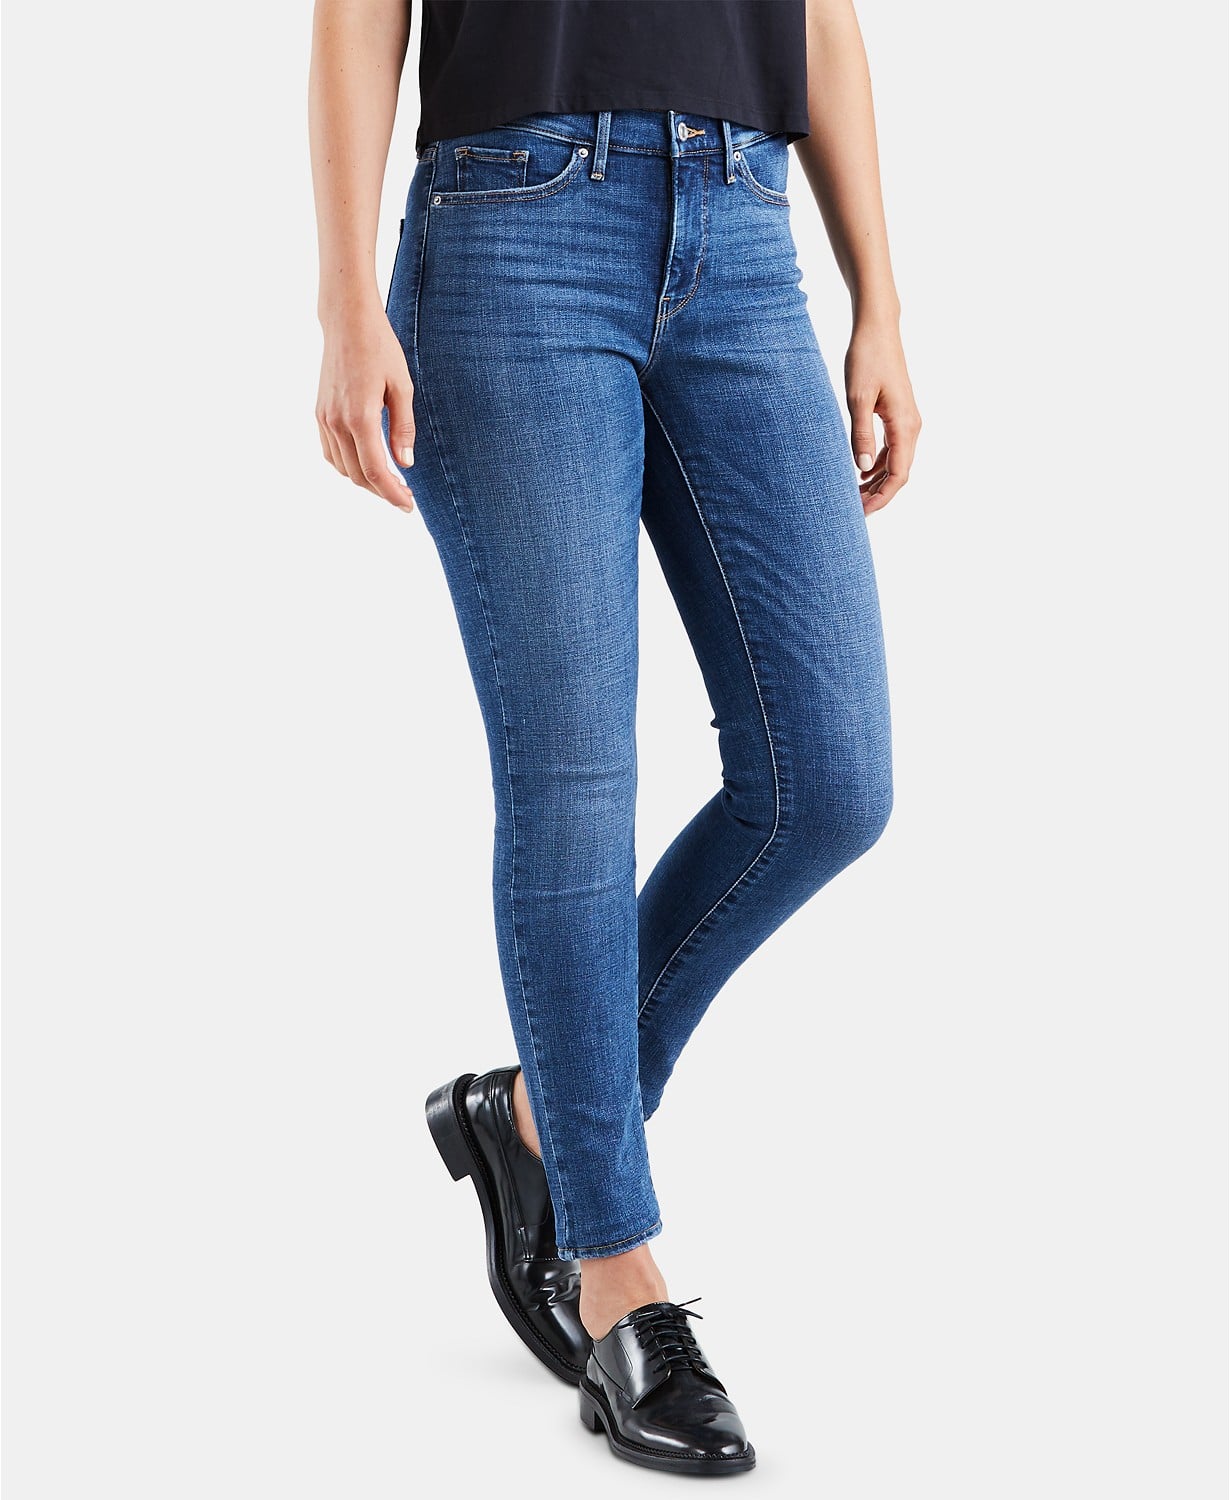 Levi's 311 Shaping Skinny Jeans | The 17 Most Popular Pieces From Macy's  That Customers Can't Stop Buying | POPSUGAR Fashion Photo 7